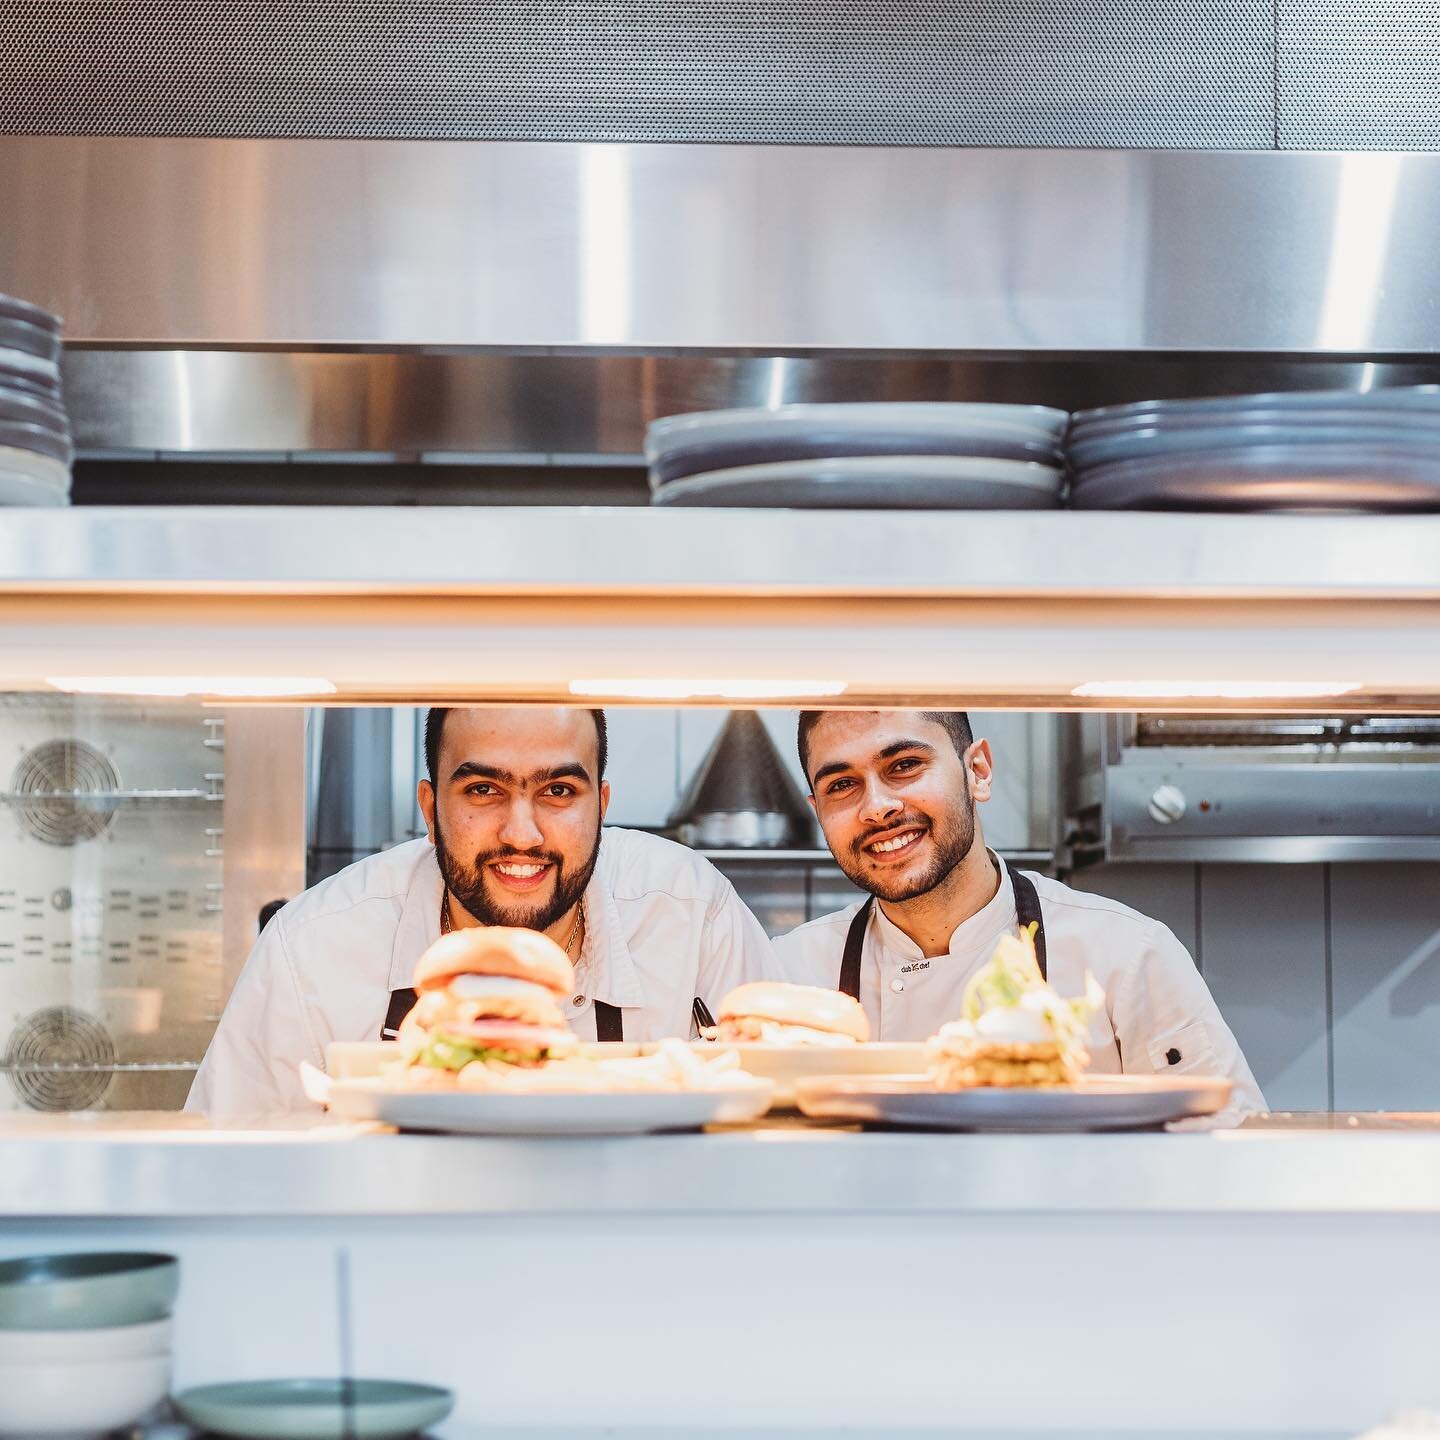 The two smiling faces you don't usually get to see. Head Chef Nirajan and Chef Apar are prepped and ready to serve up your breakfast, brunch or this week!

Head on in, we're open every day 😍